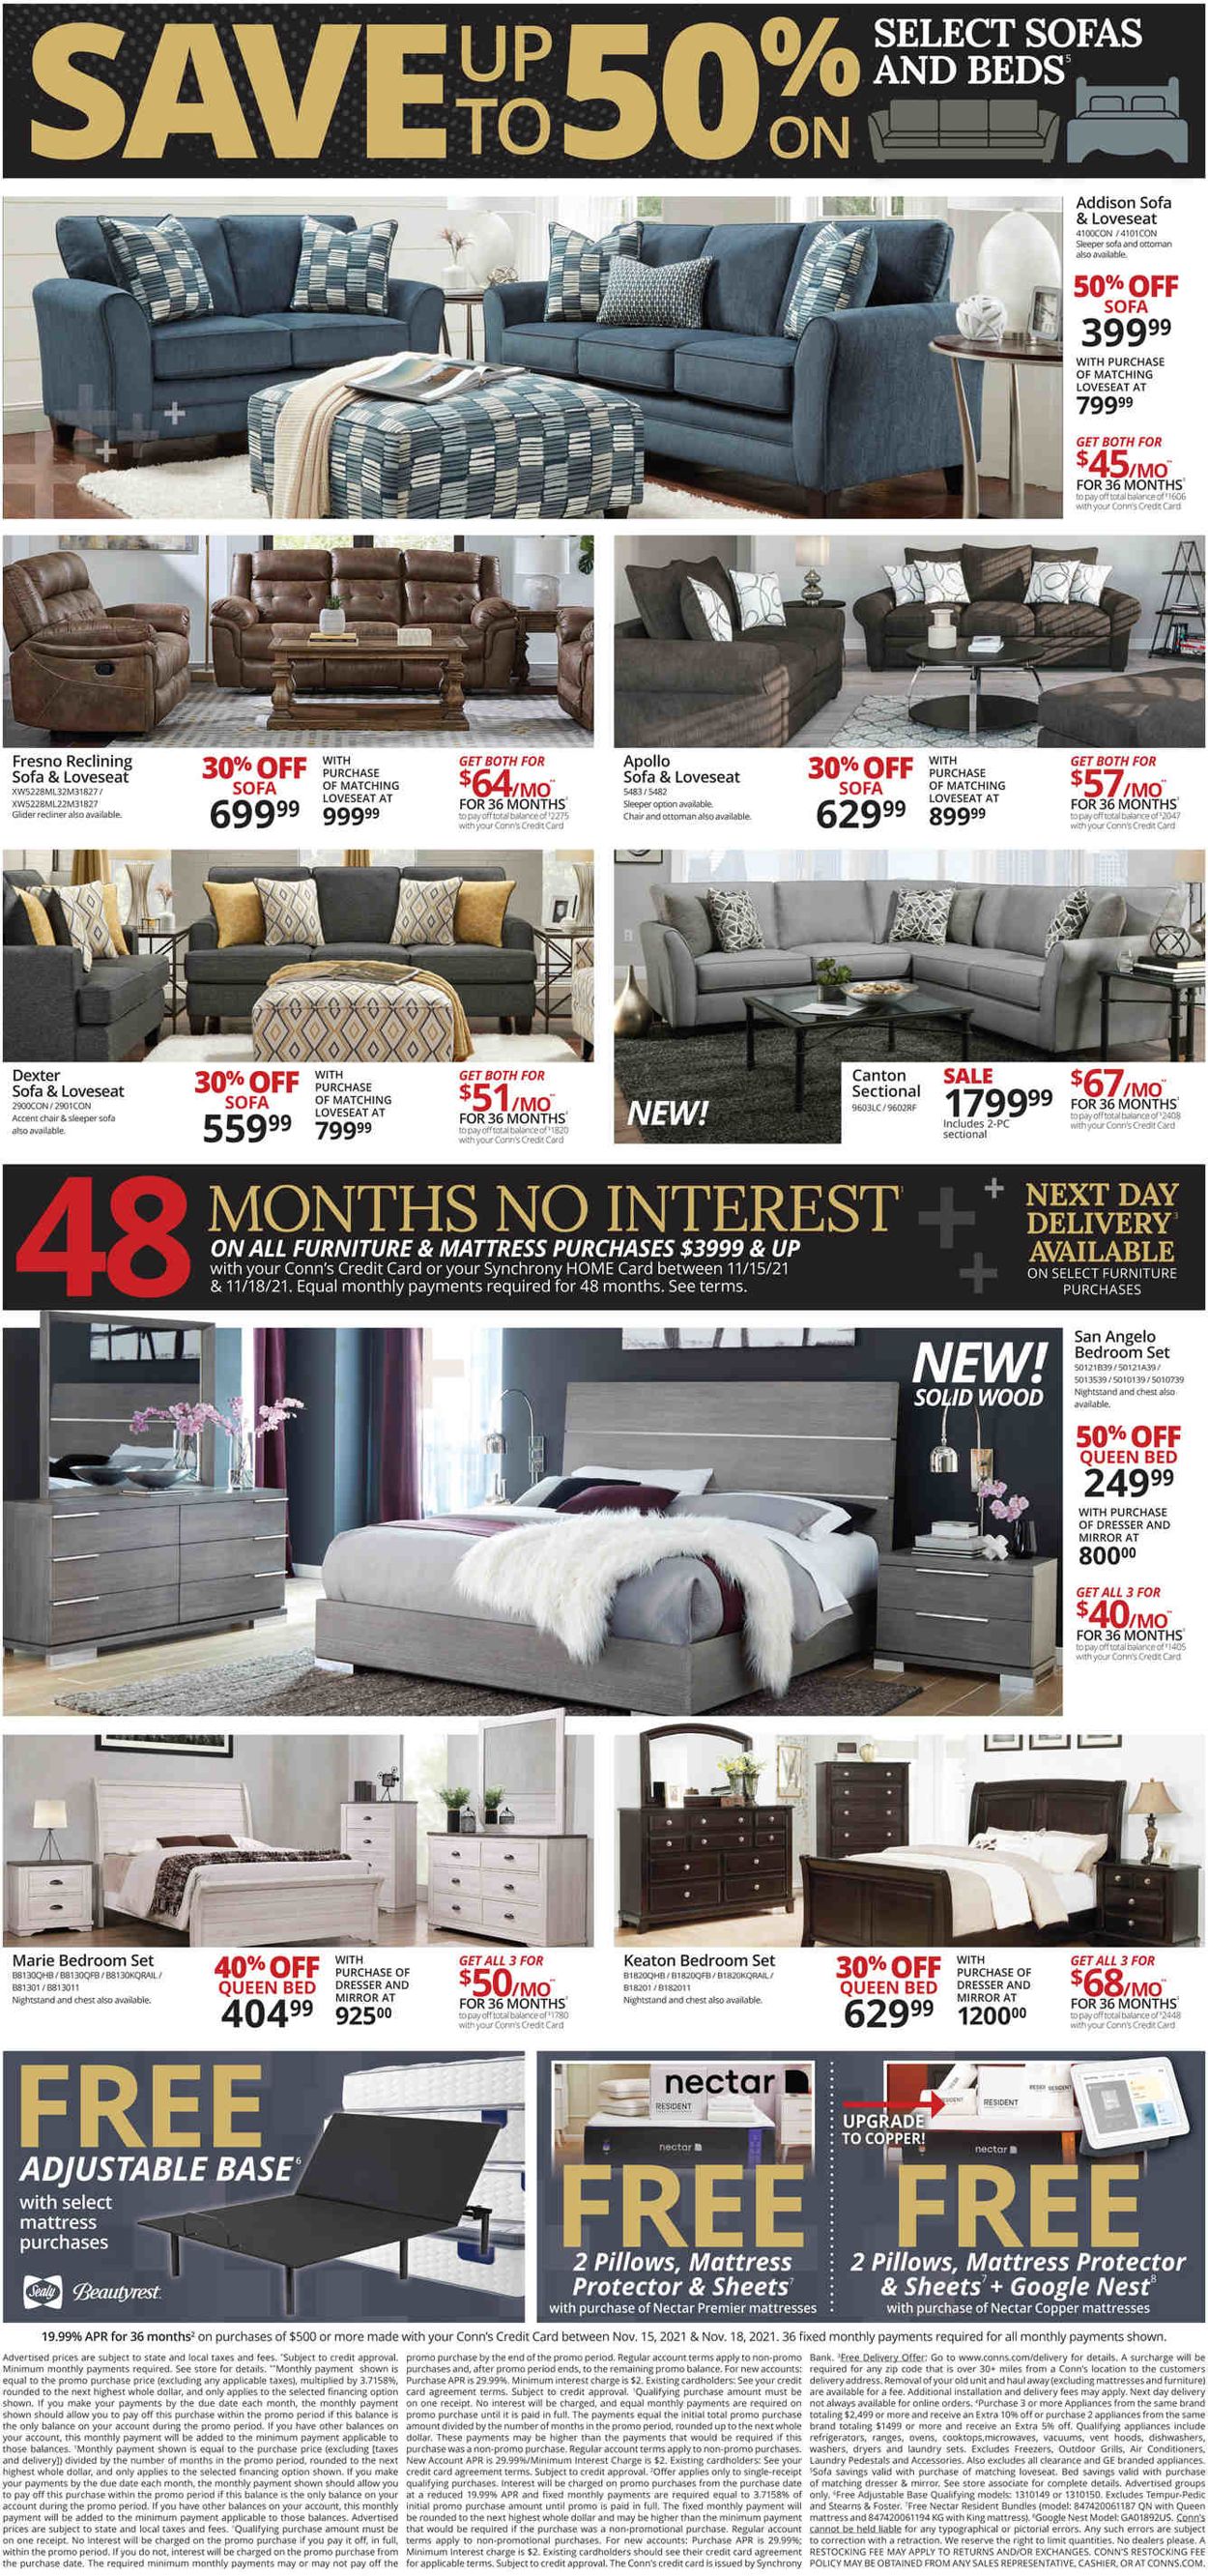 Conn's Home Plus BLACK FRIDAY 2021 Weekly Ad Circular - valid 11/15-11/18/2021 (Page 2)